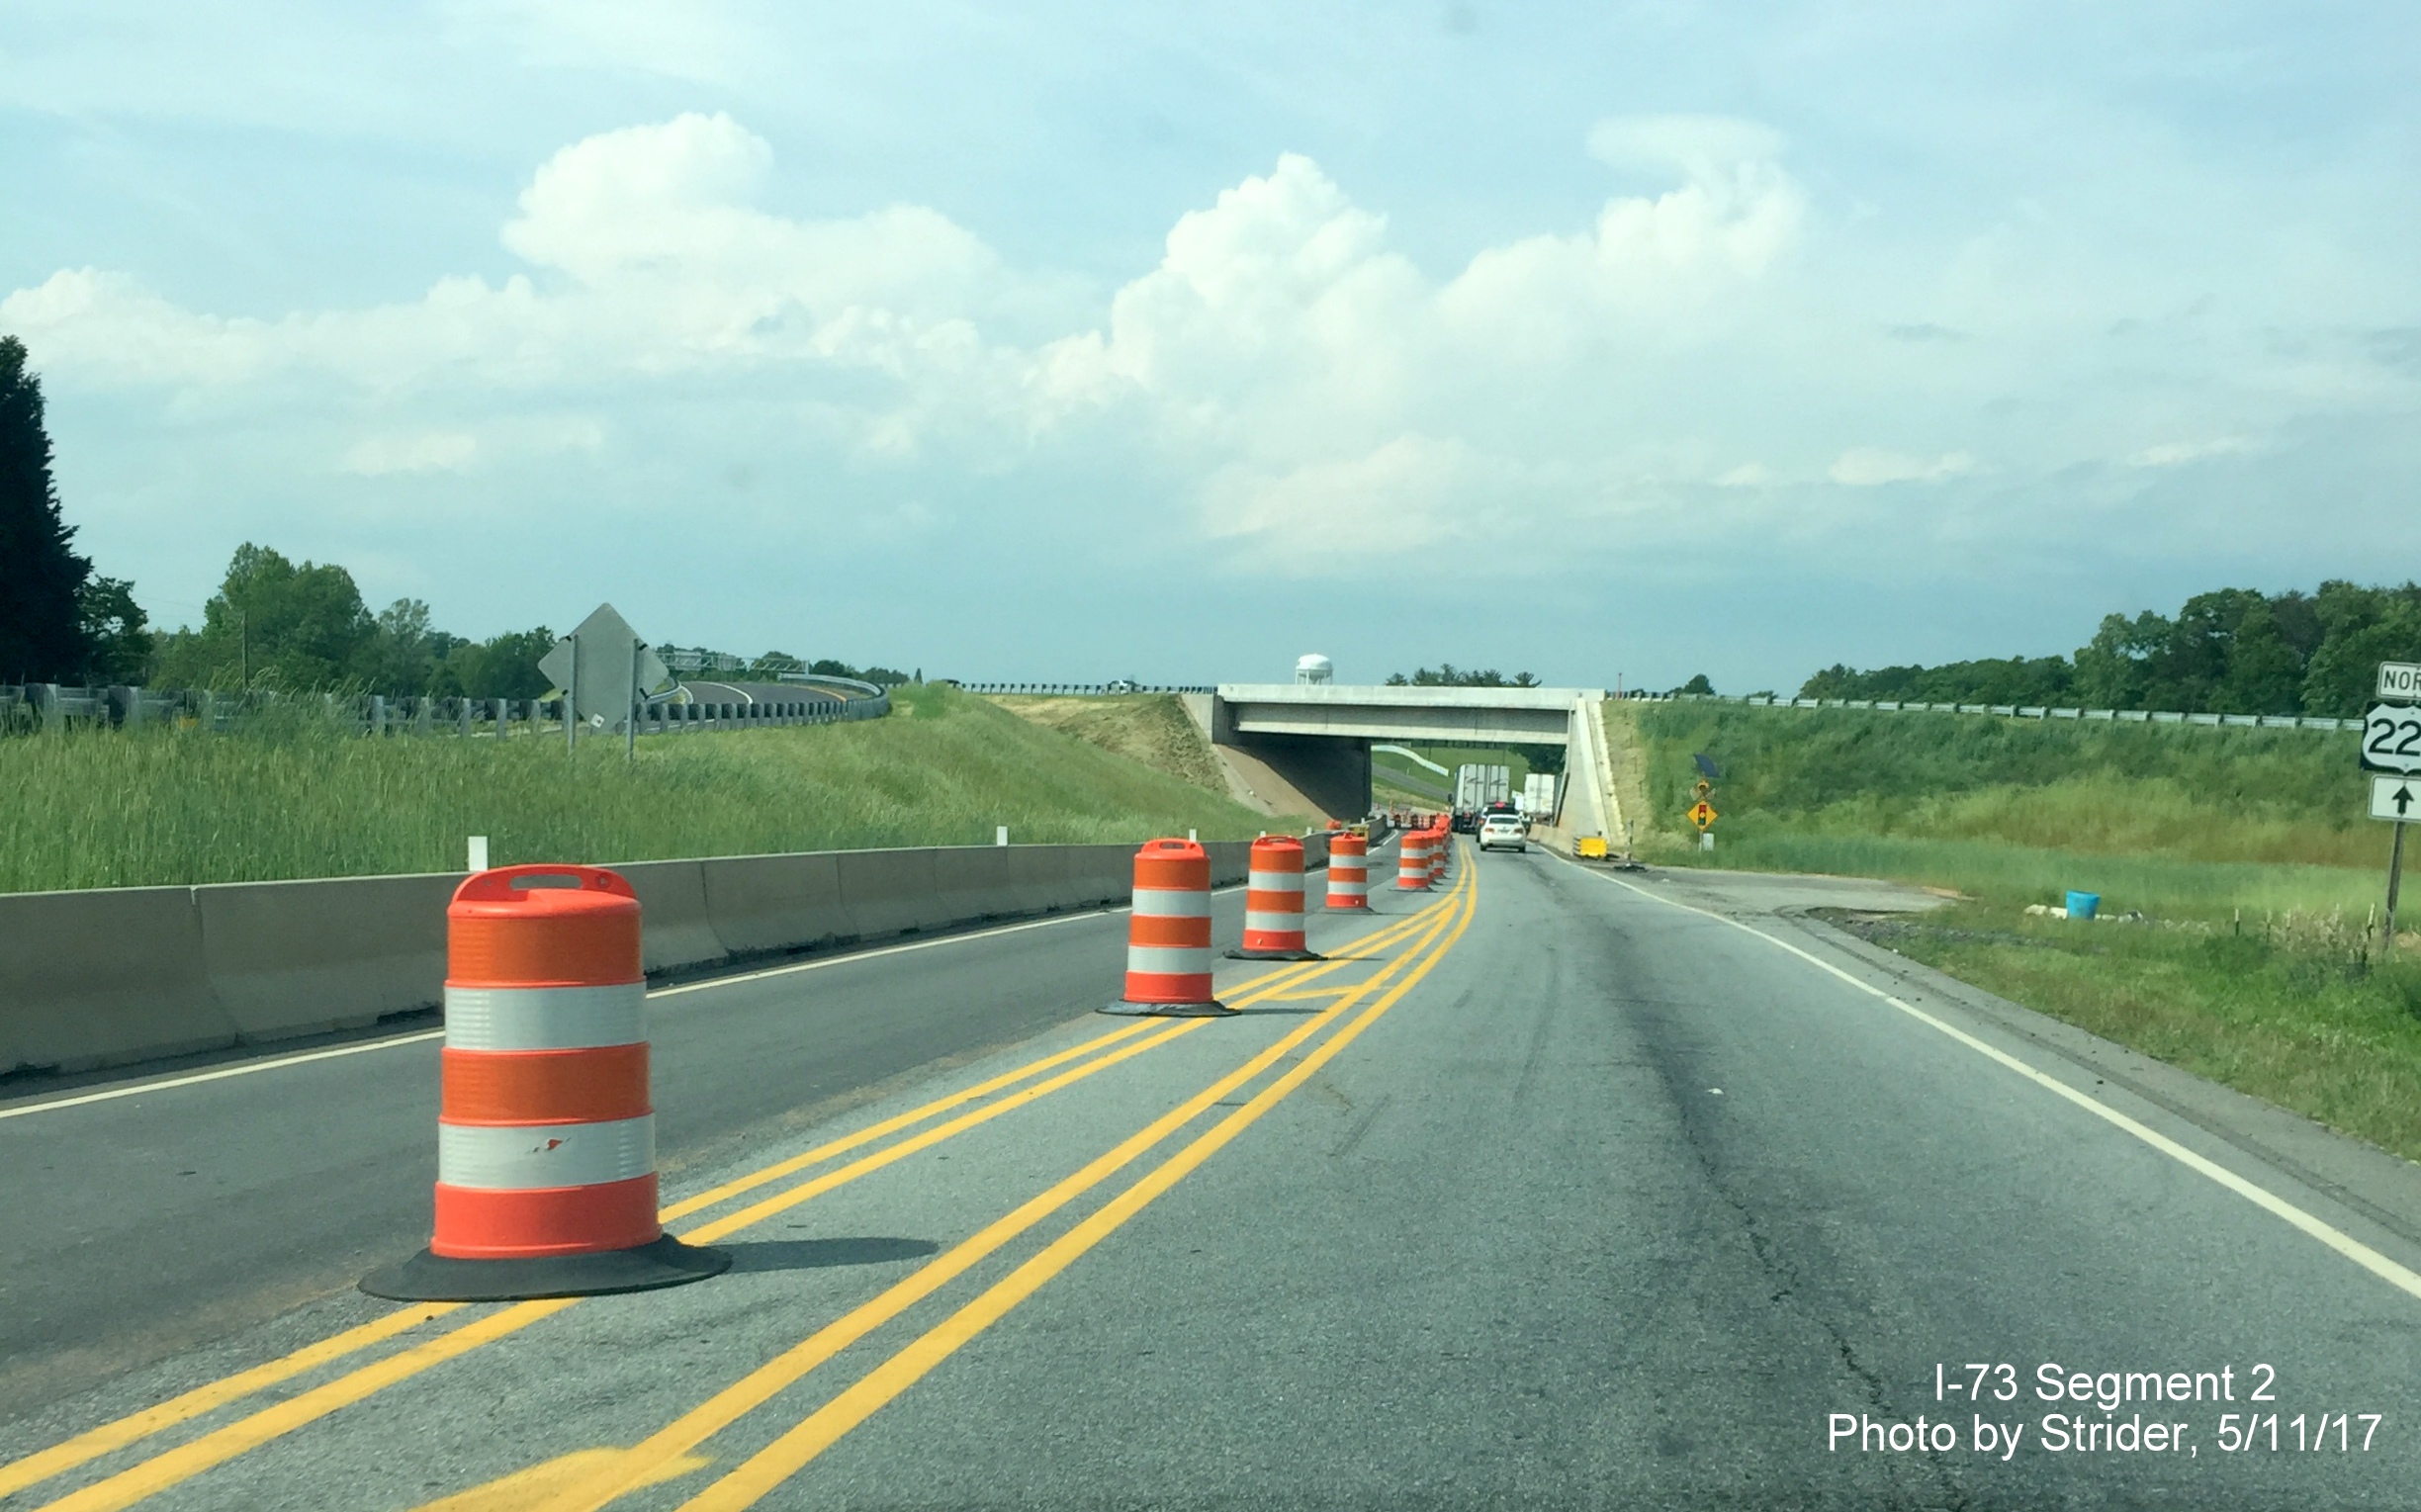 Image of recently opened off-ramp to NC 65 from US 220 North using Future I-73 South lanes, from Strider